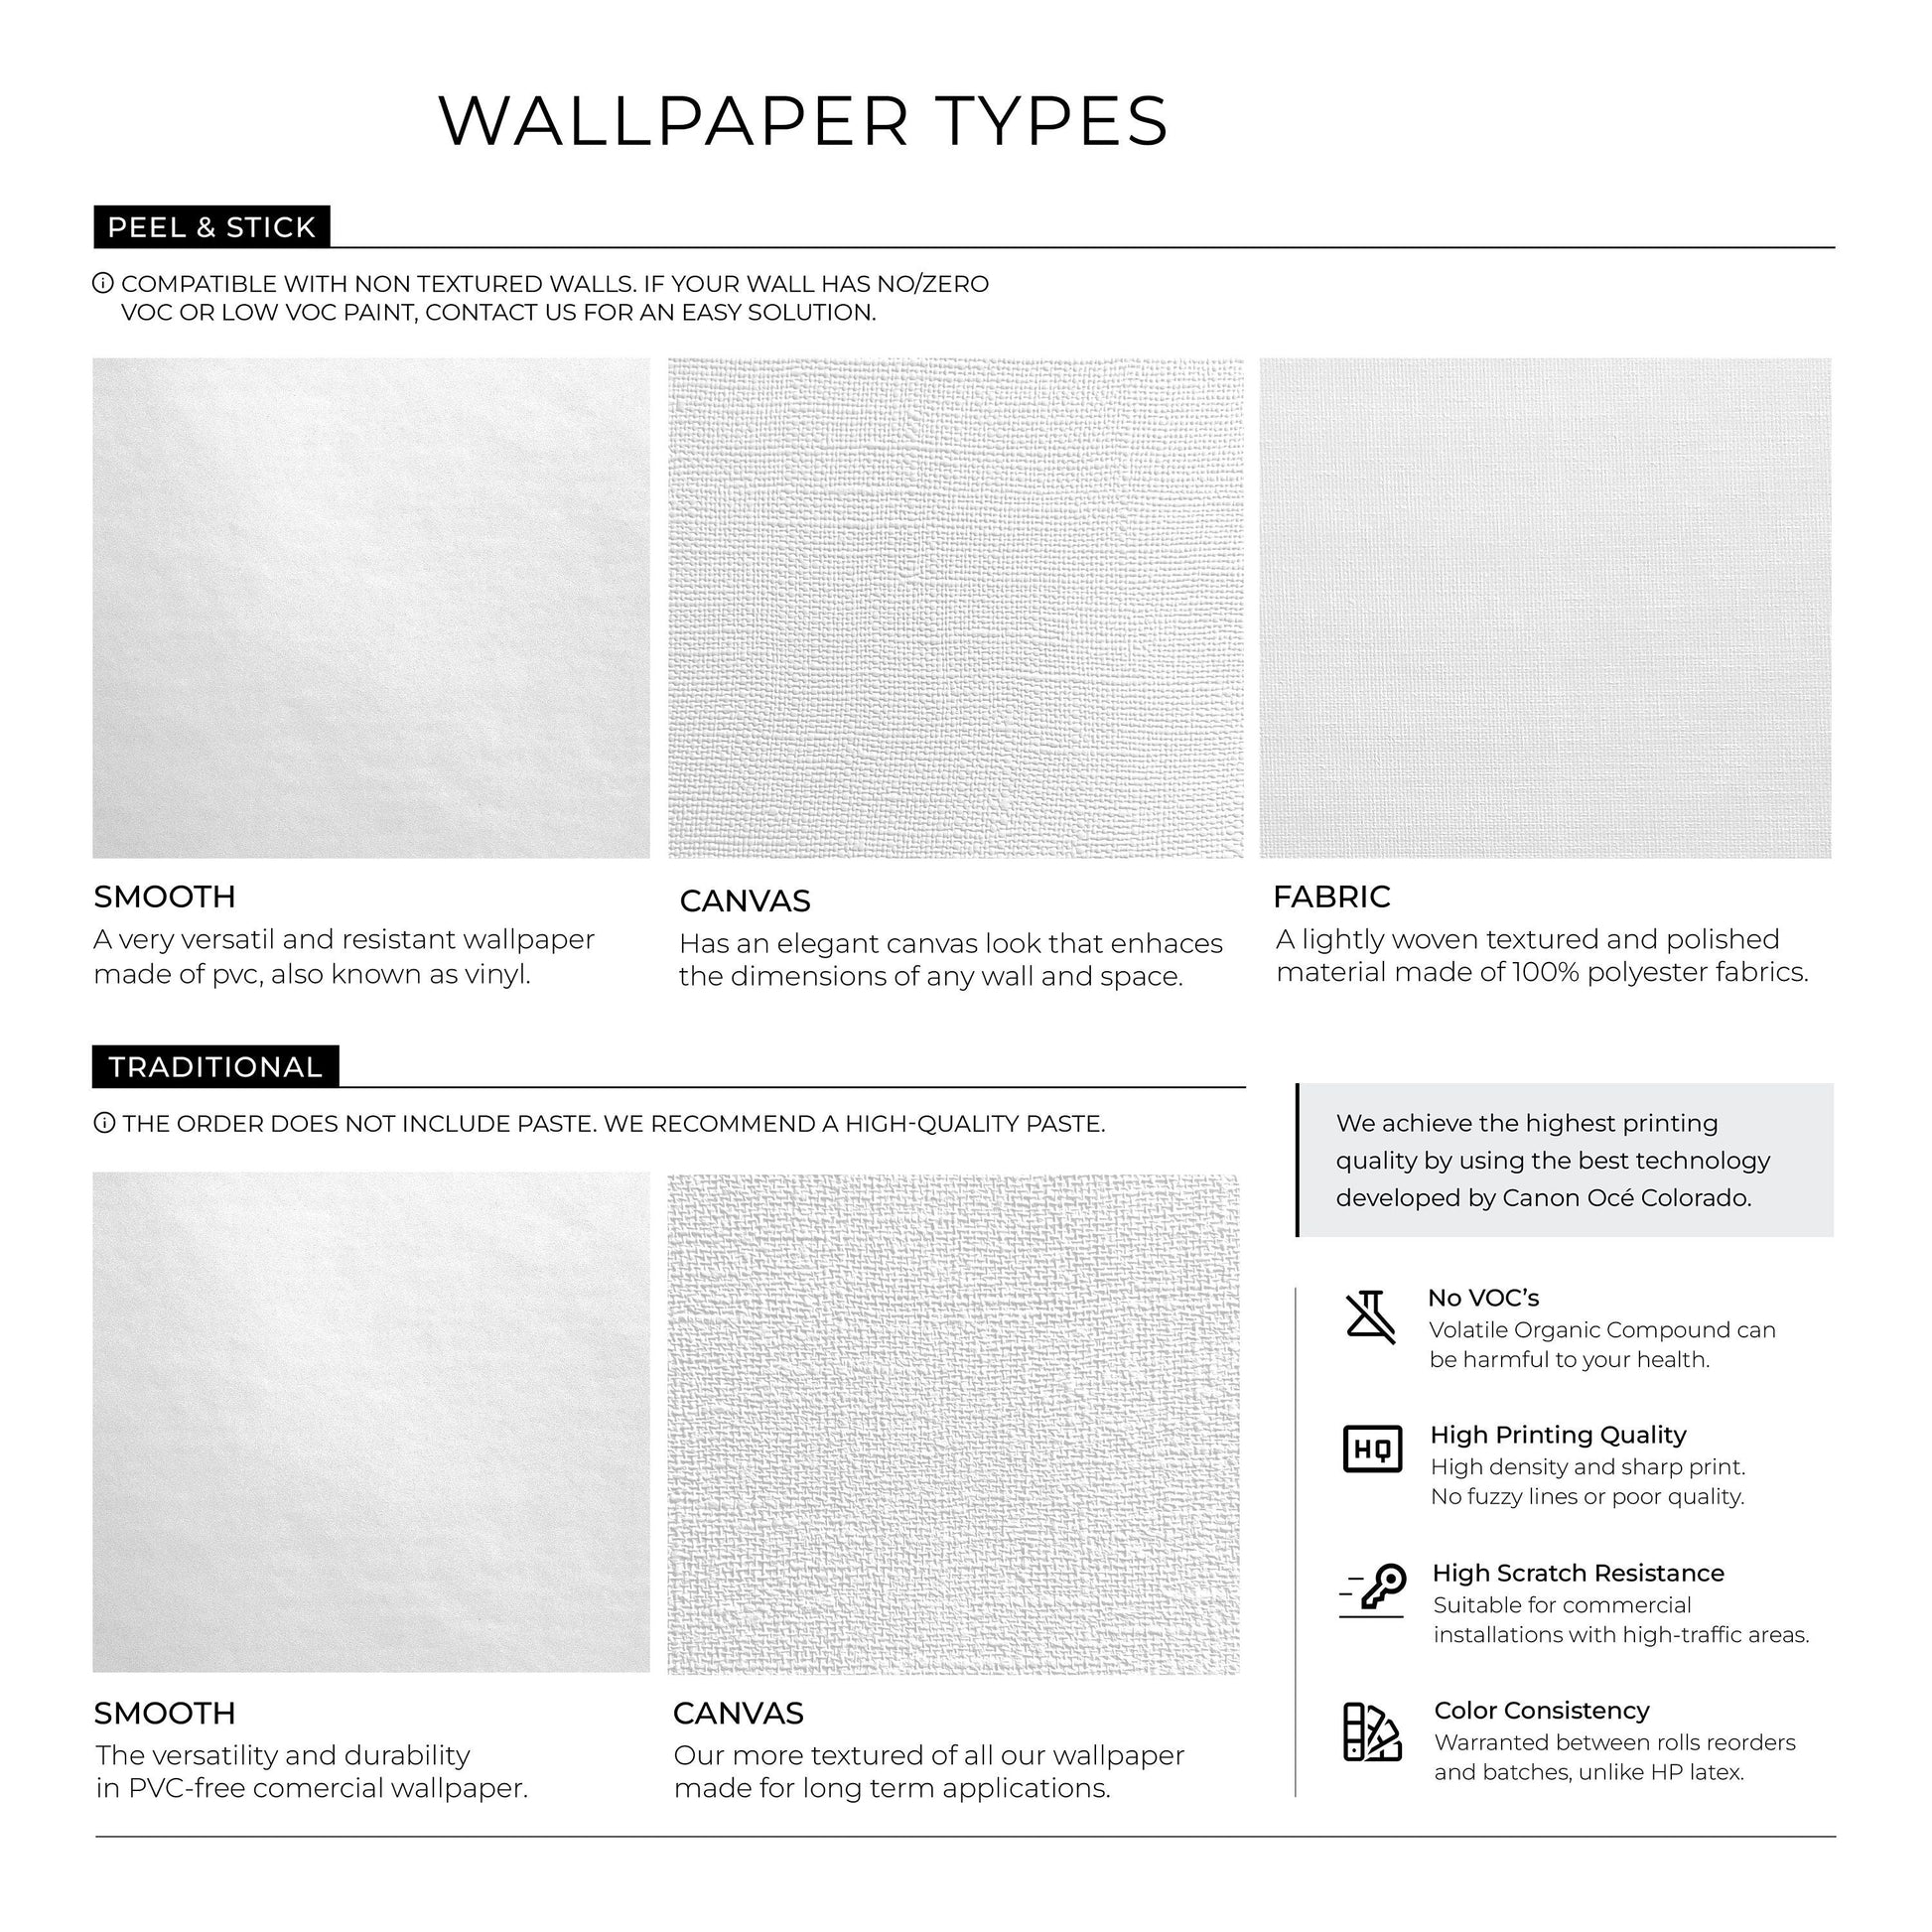 Black and White Waves Wallpaper / Peel and Stick Wallpaper Removable Wallpaper Home Decor Wall Art Wall Decor Room Decor - C668